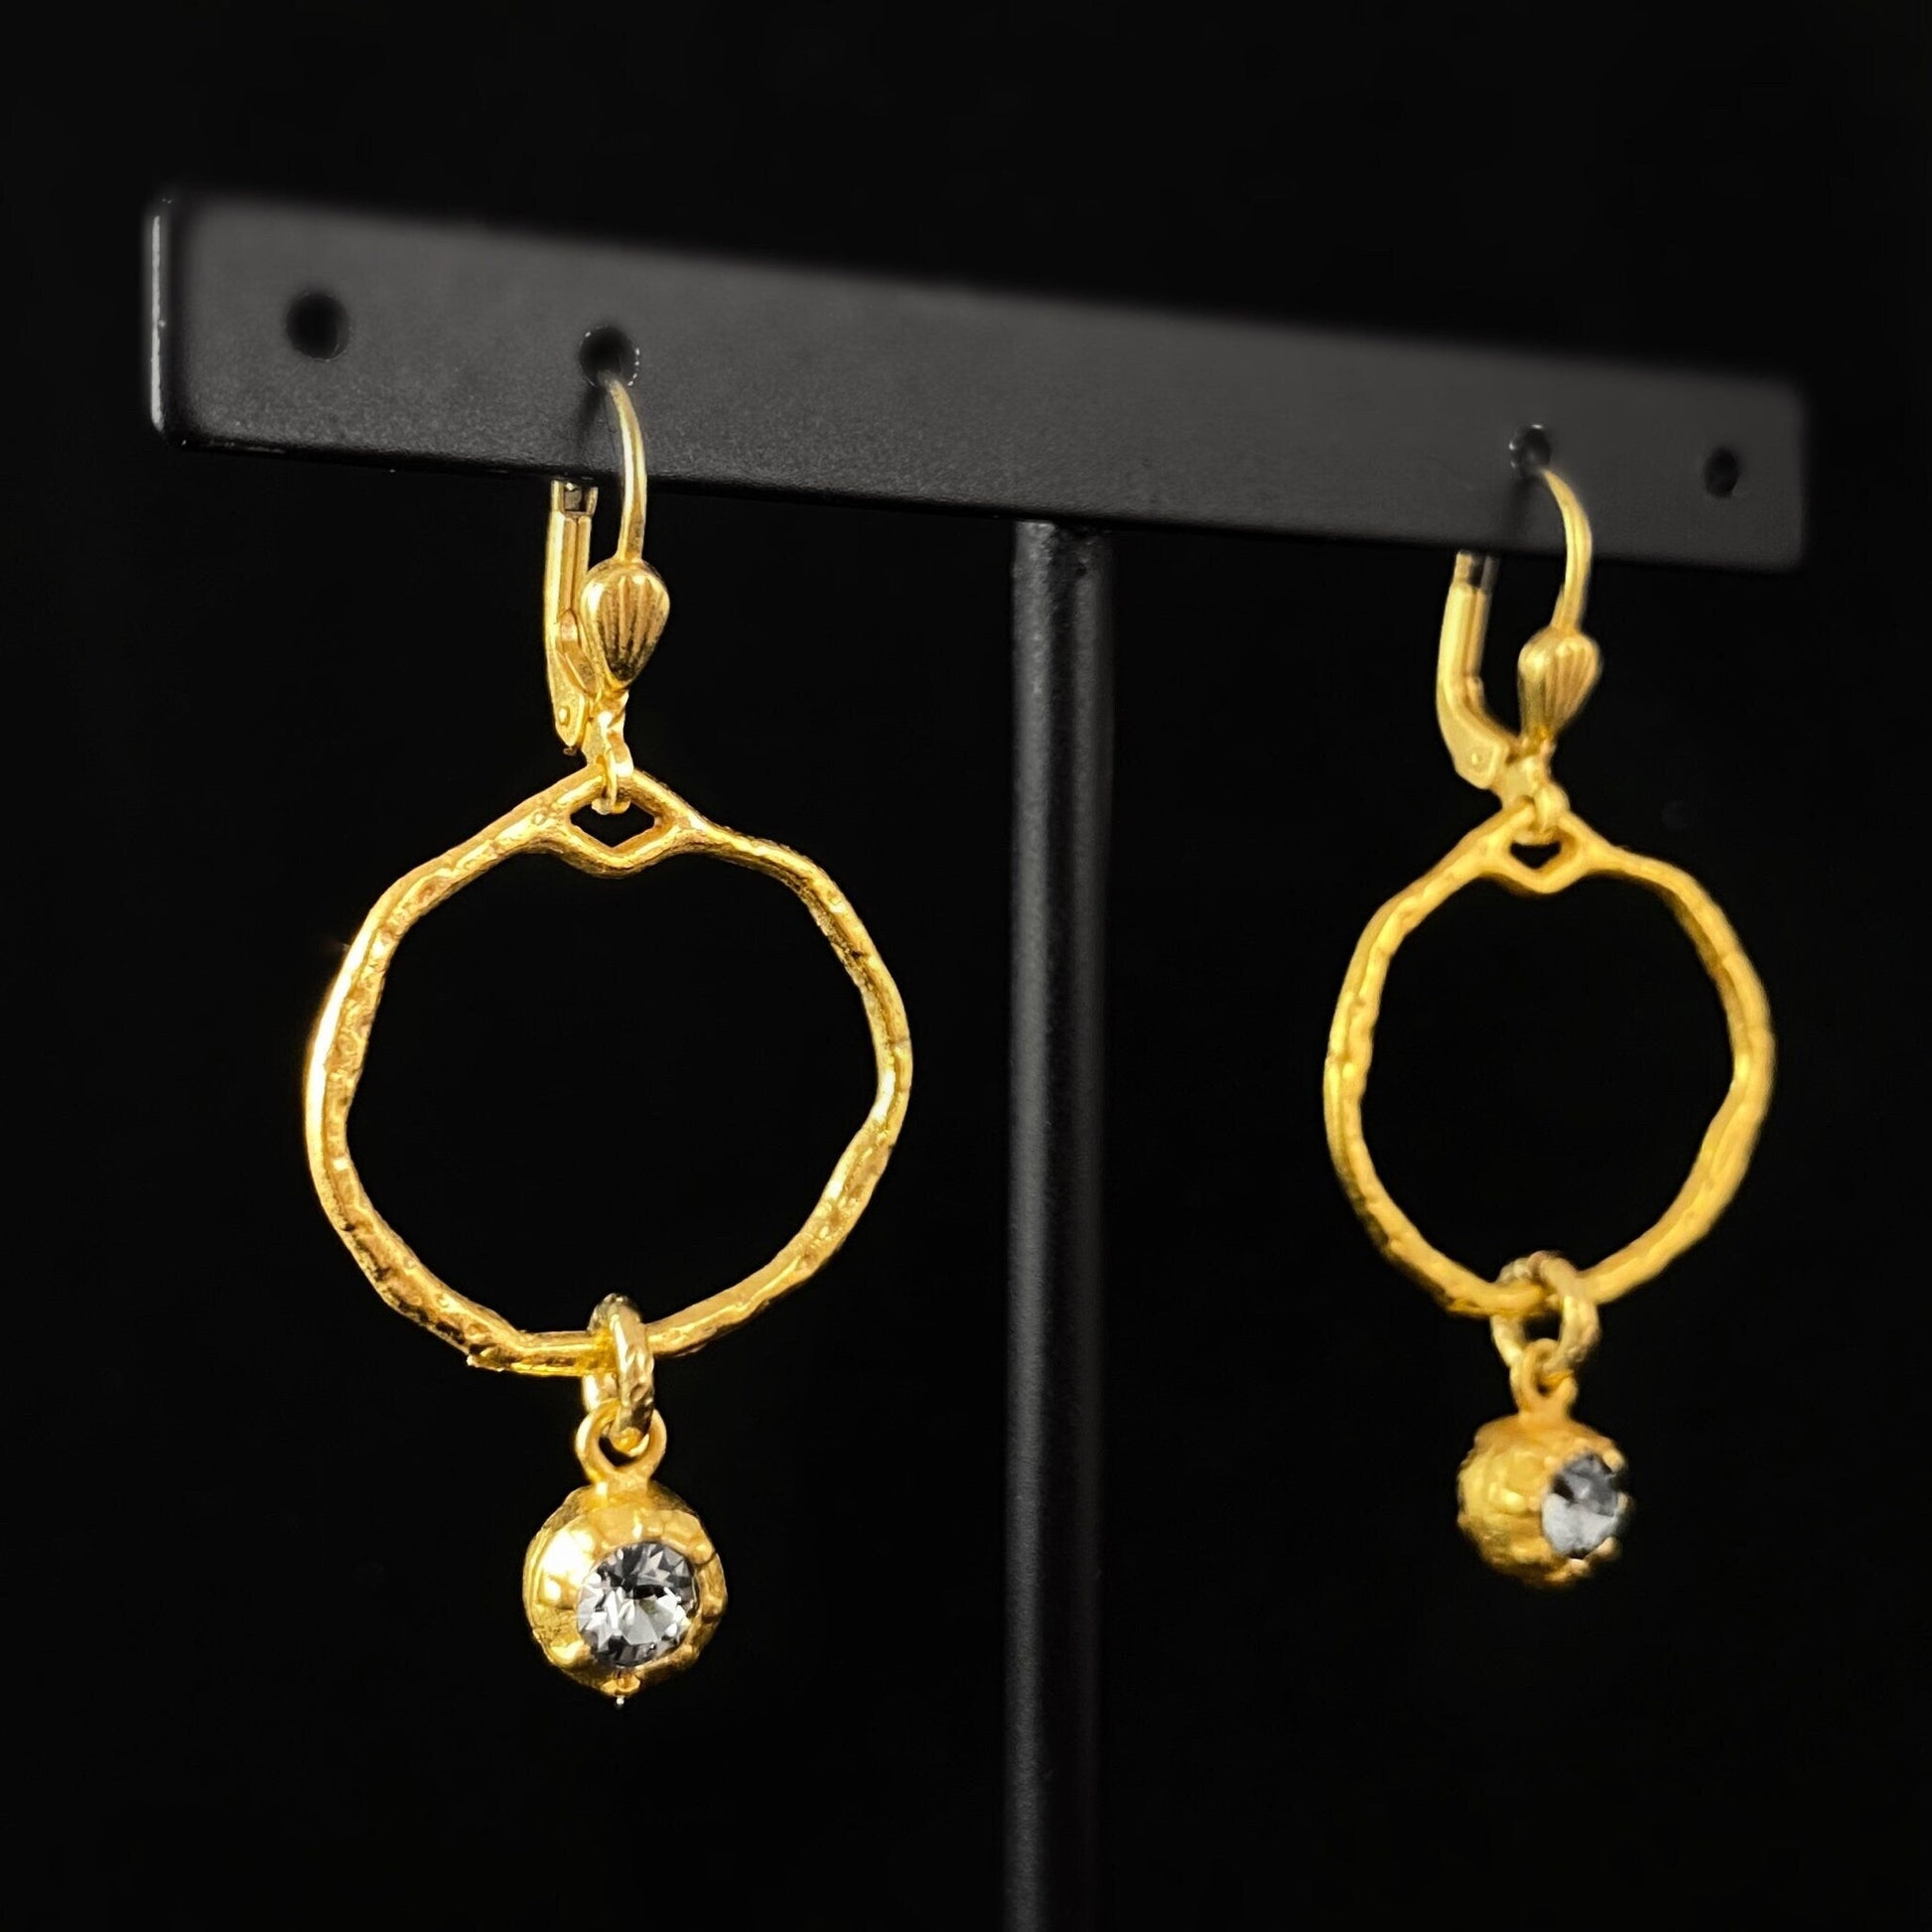 Hammered Gold Hoop with Smoky Clear Swarovski Crystal Earrings - La Vie Parisienne by Catherine Popesco